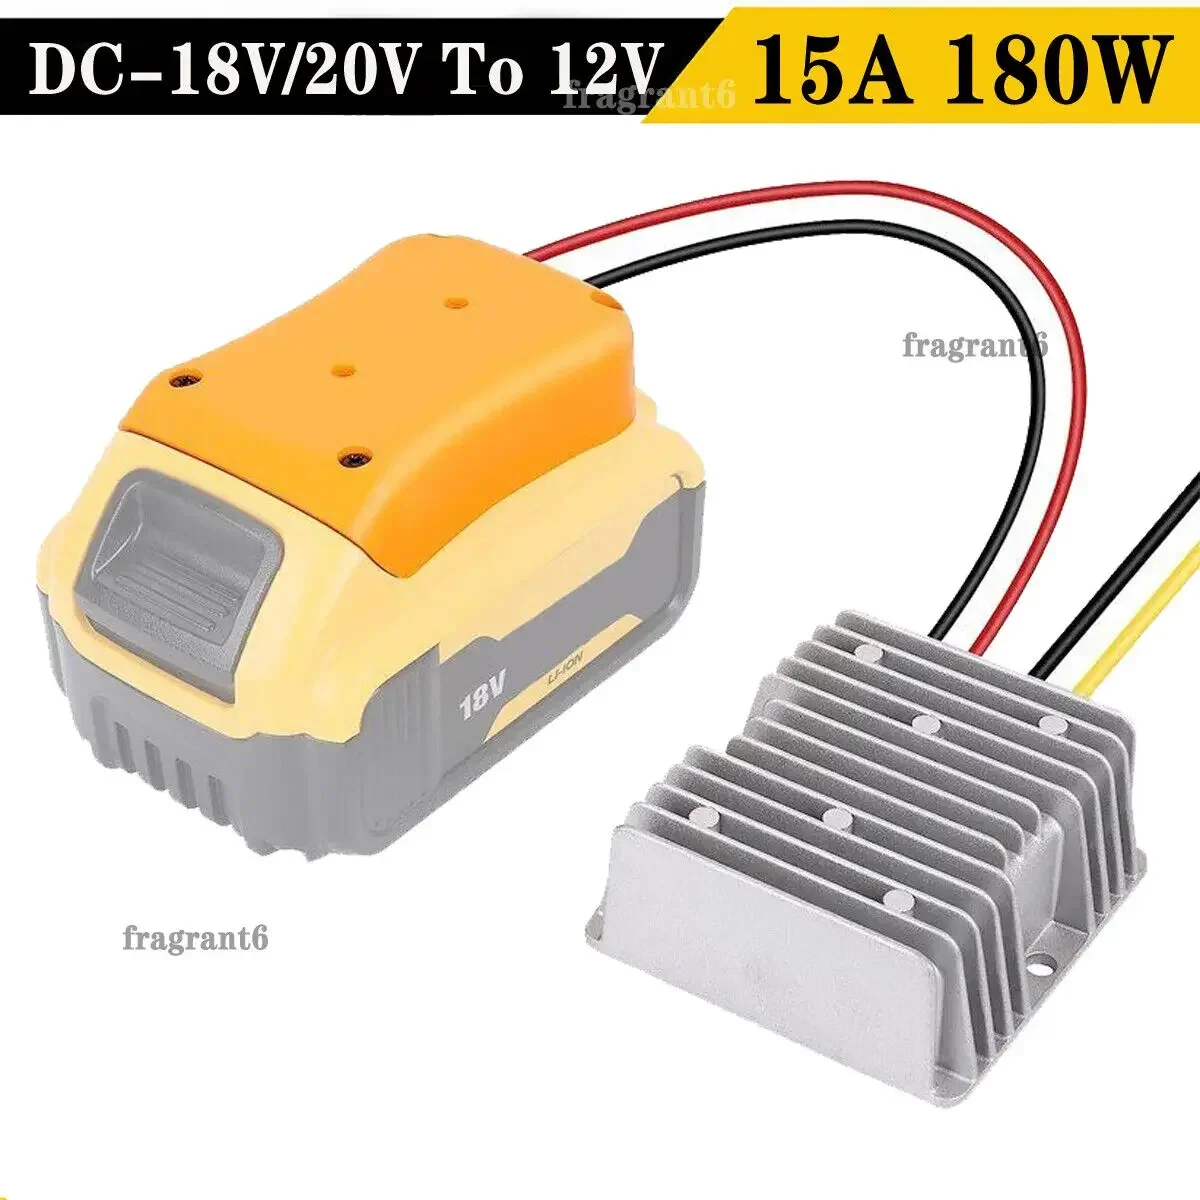 Step Down Converter 20V To 12V Adapter for Dewalt 20V Li-ion Battery 15A 180W Adapter Automatic Buck Boost Converter Regulator automatic water timer outdoor garden irrigation controller 1 outlet programmable hose faucet timer garden automatic watering device without battery yellow